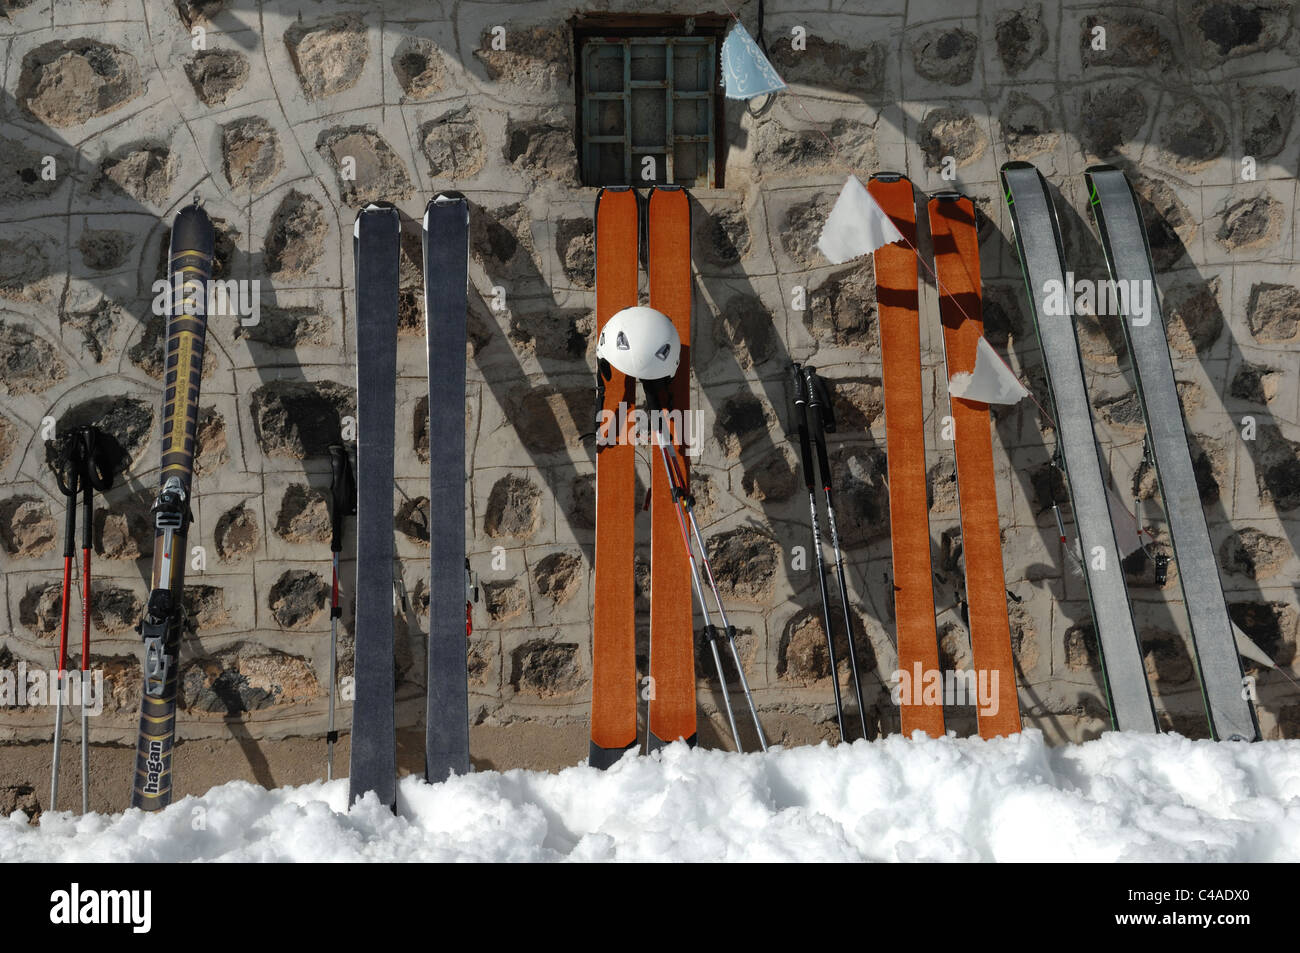 A helmet and skis designed for ski mountaineering with skins on propped up against a stone building in Iran Stock Photo